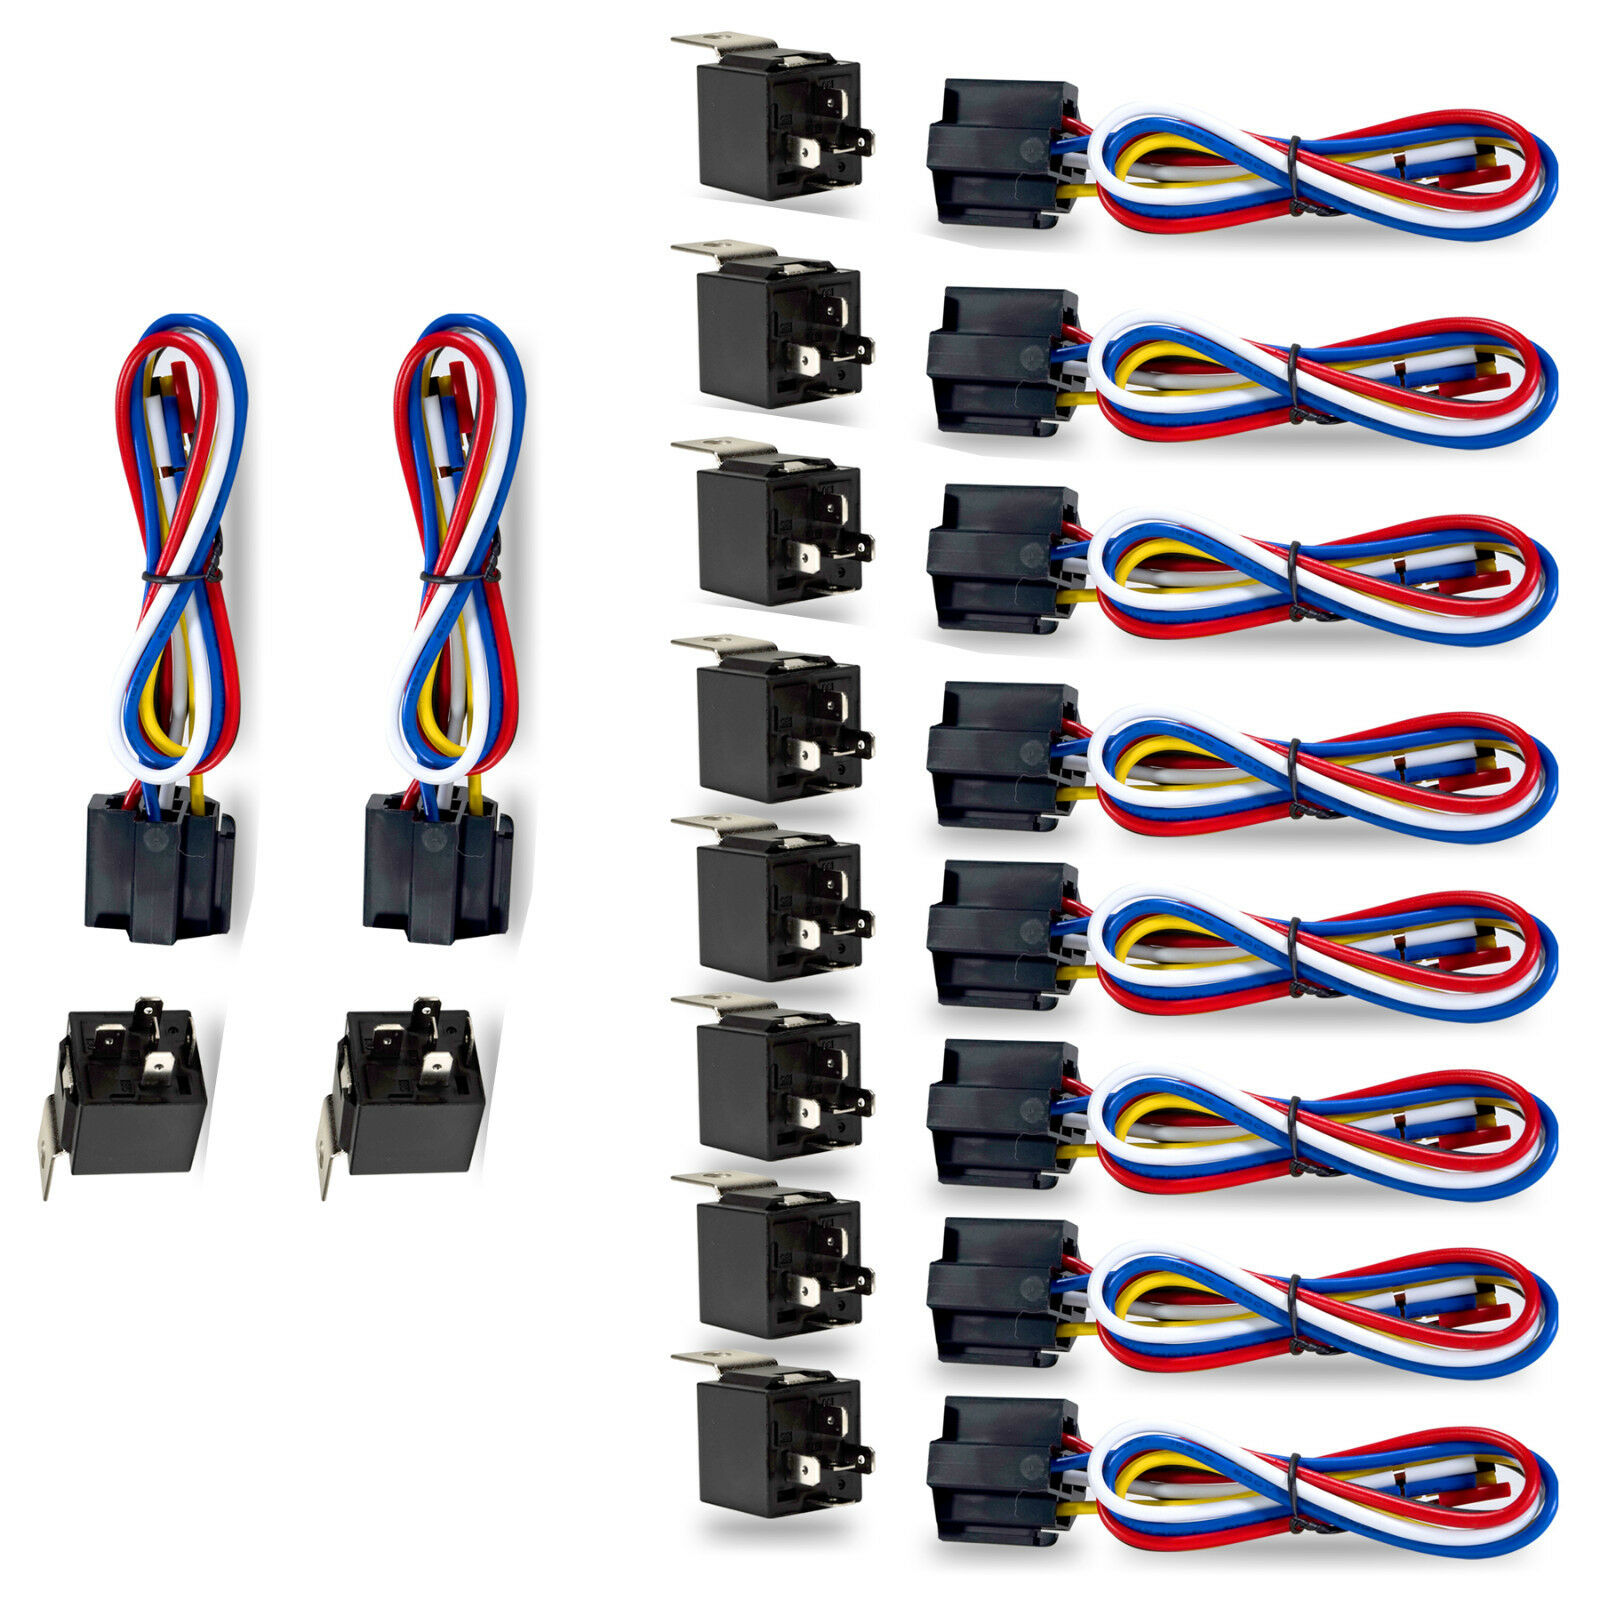 10 Pack Car 30a 40 Amp Relay Automotive Harness Socket 5 Wires Spdt 5 Pin Dc 12v